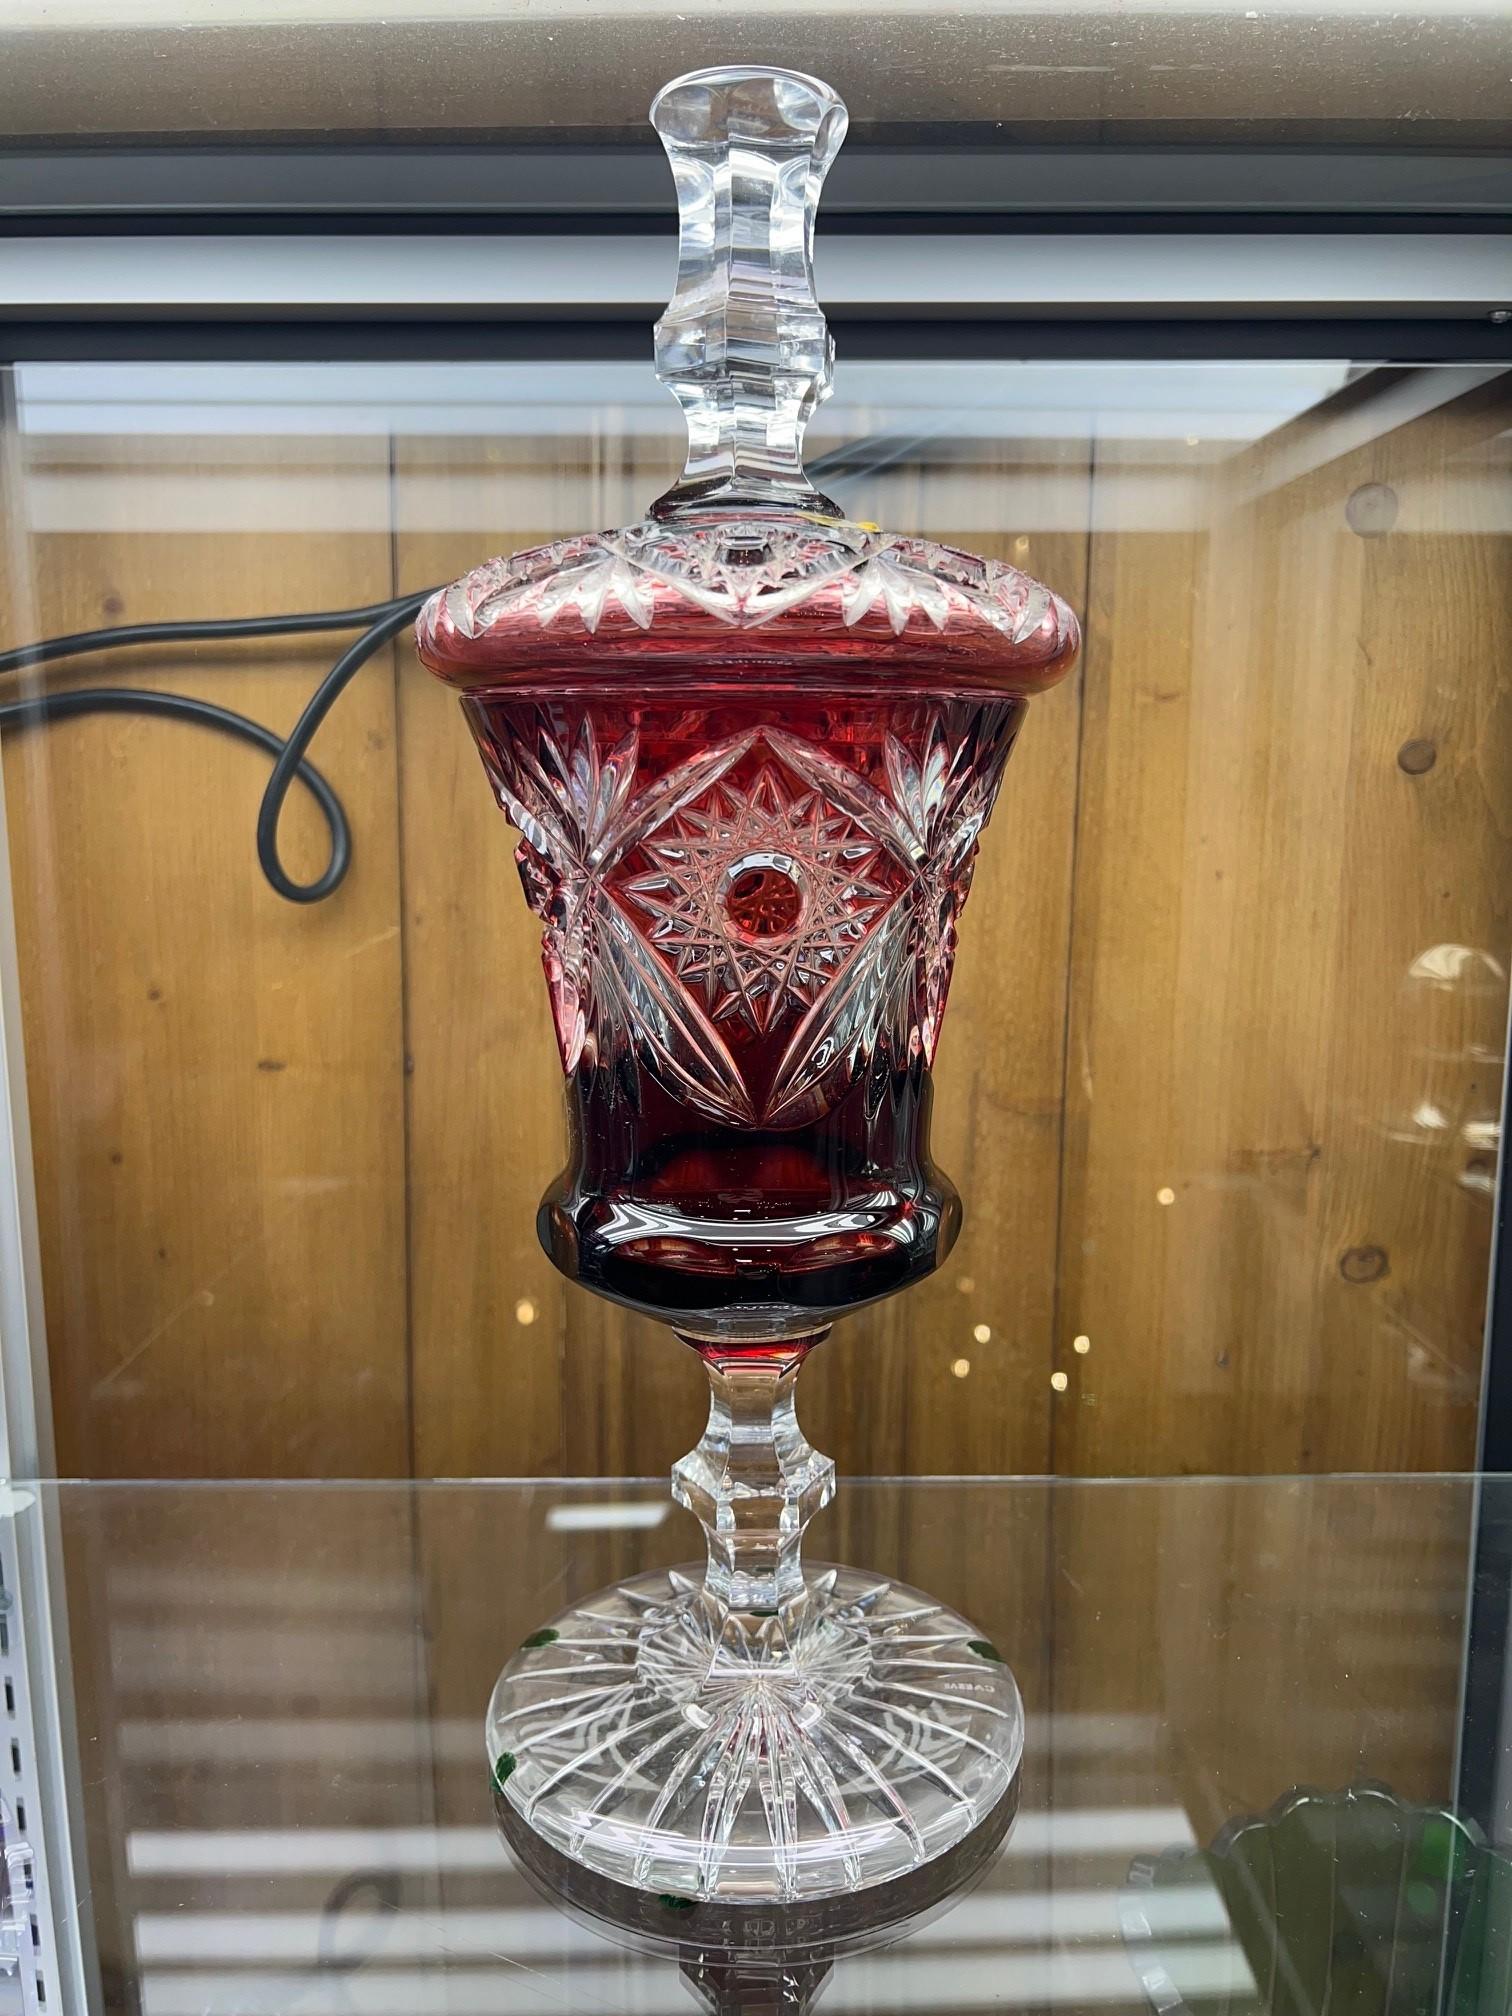 Stunning hand cut lead crystal tall pedestal urn or candy dish with a cover created as a work of art by the hands of the finest Czech glass workers. The Caesar Crystal Company in the Czech Republic has been selling hand cut lead crystal pieces since